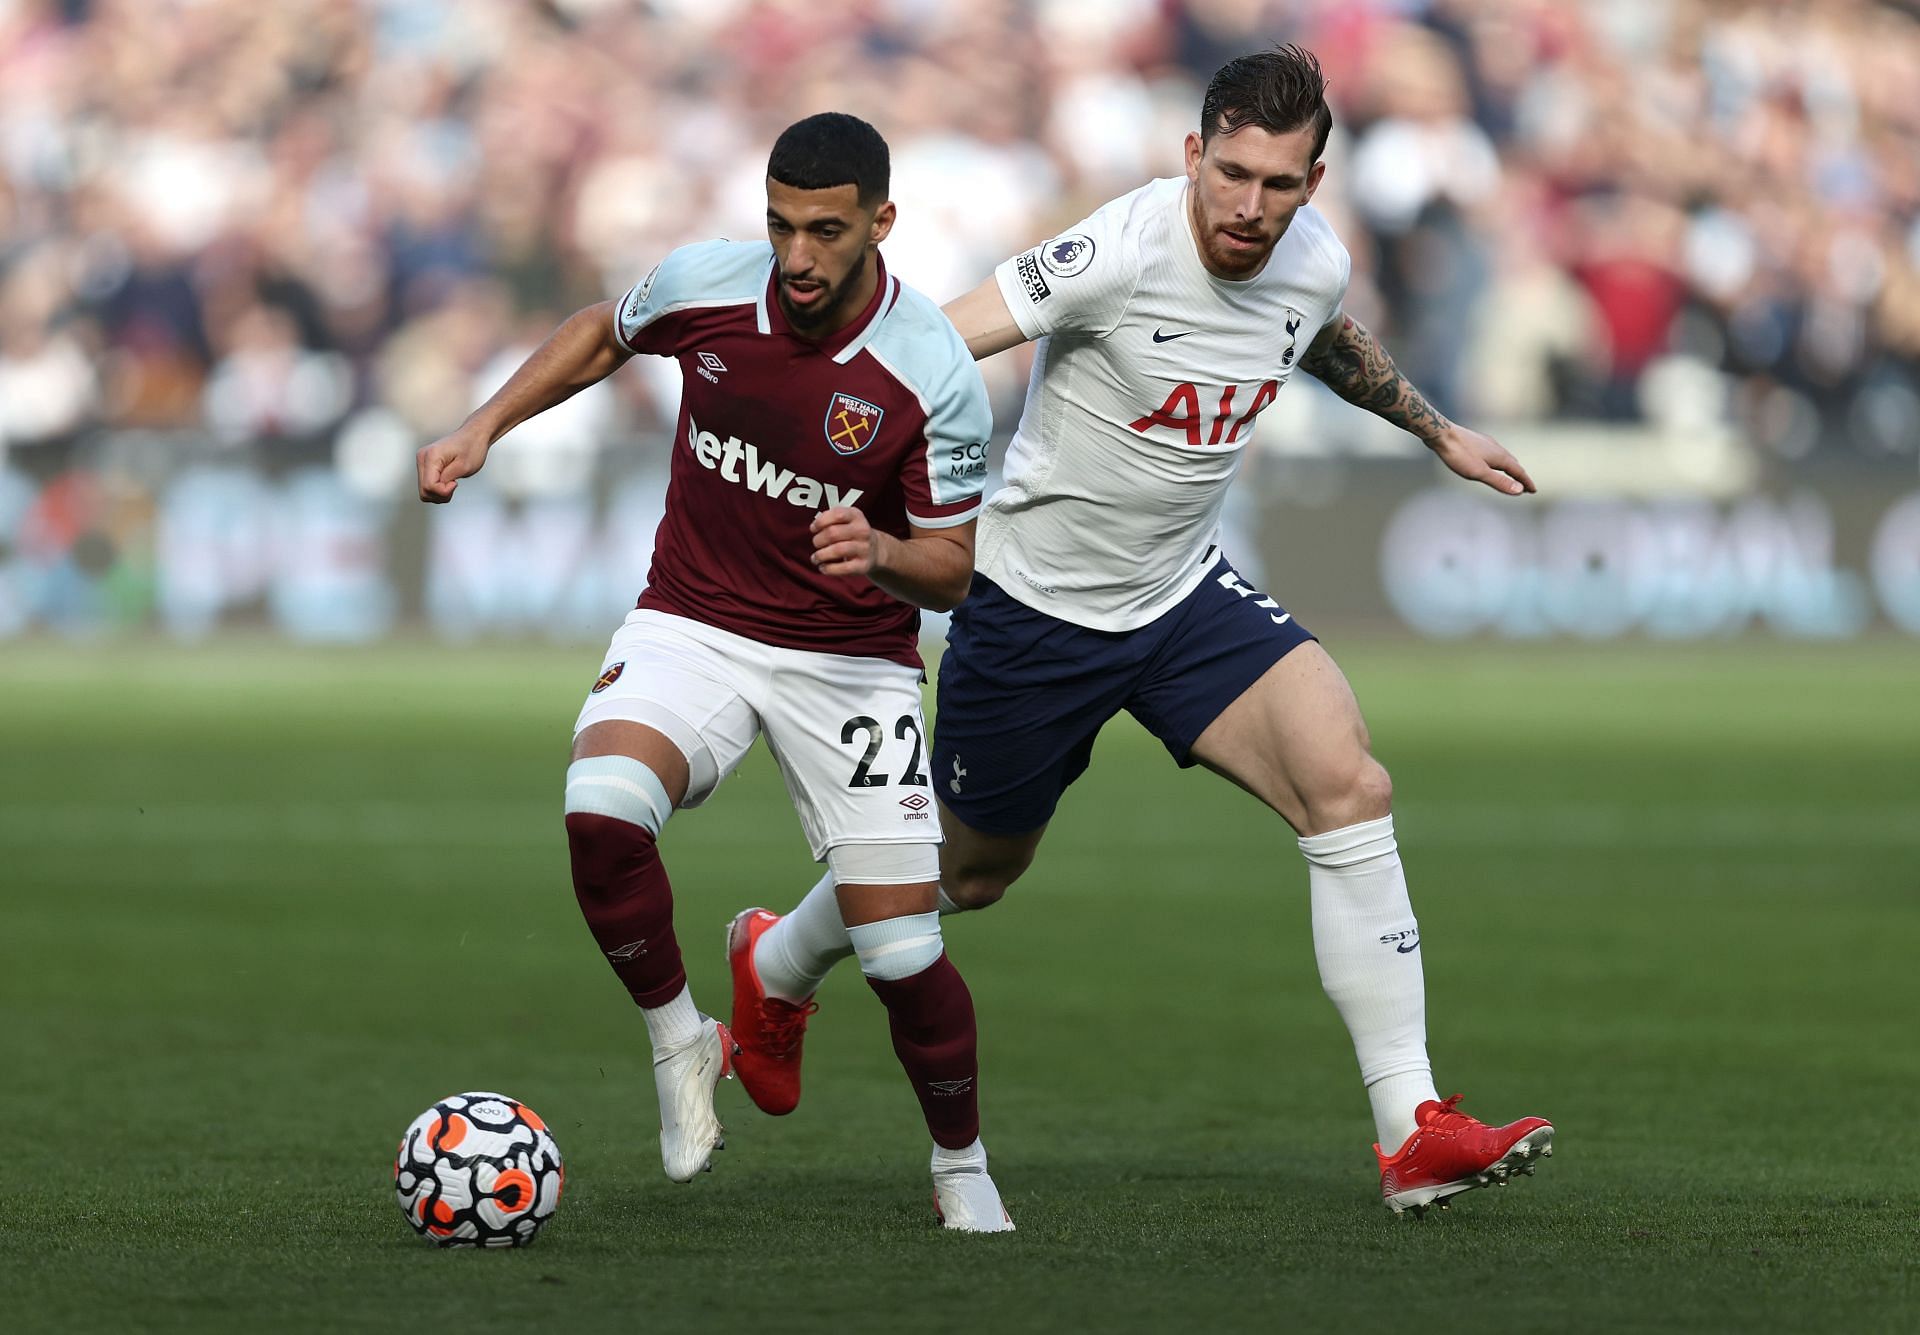 Tottenham and West Ham meet in a London derby in the League Cup